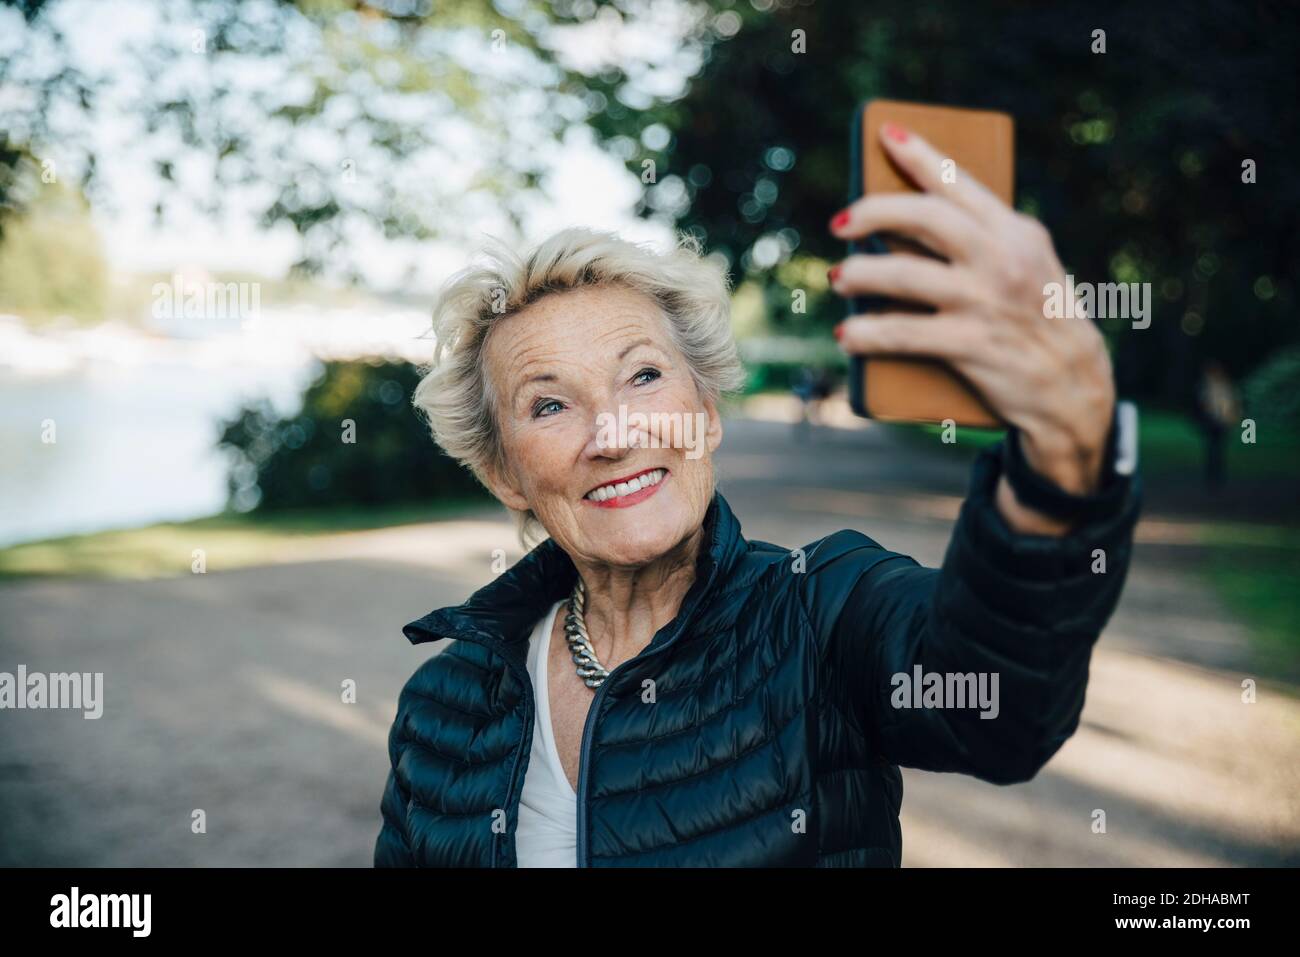 Smiling senior woman taking selfie with smart phone in park Stock Photo